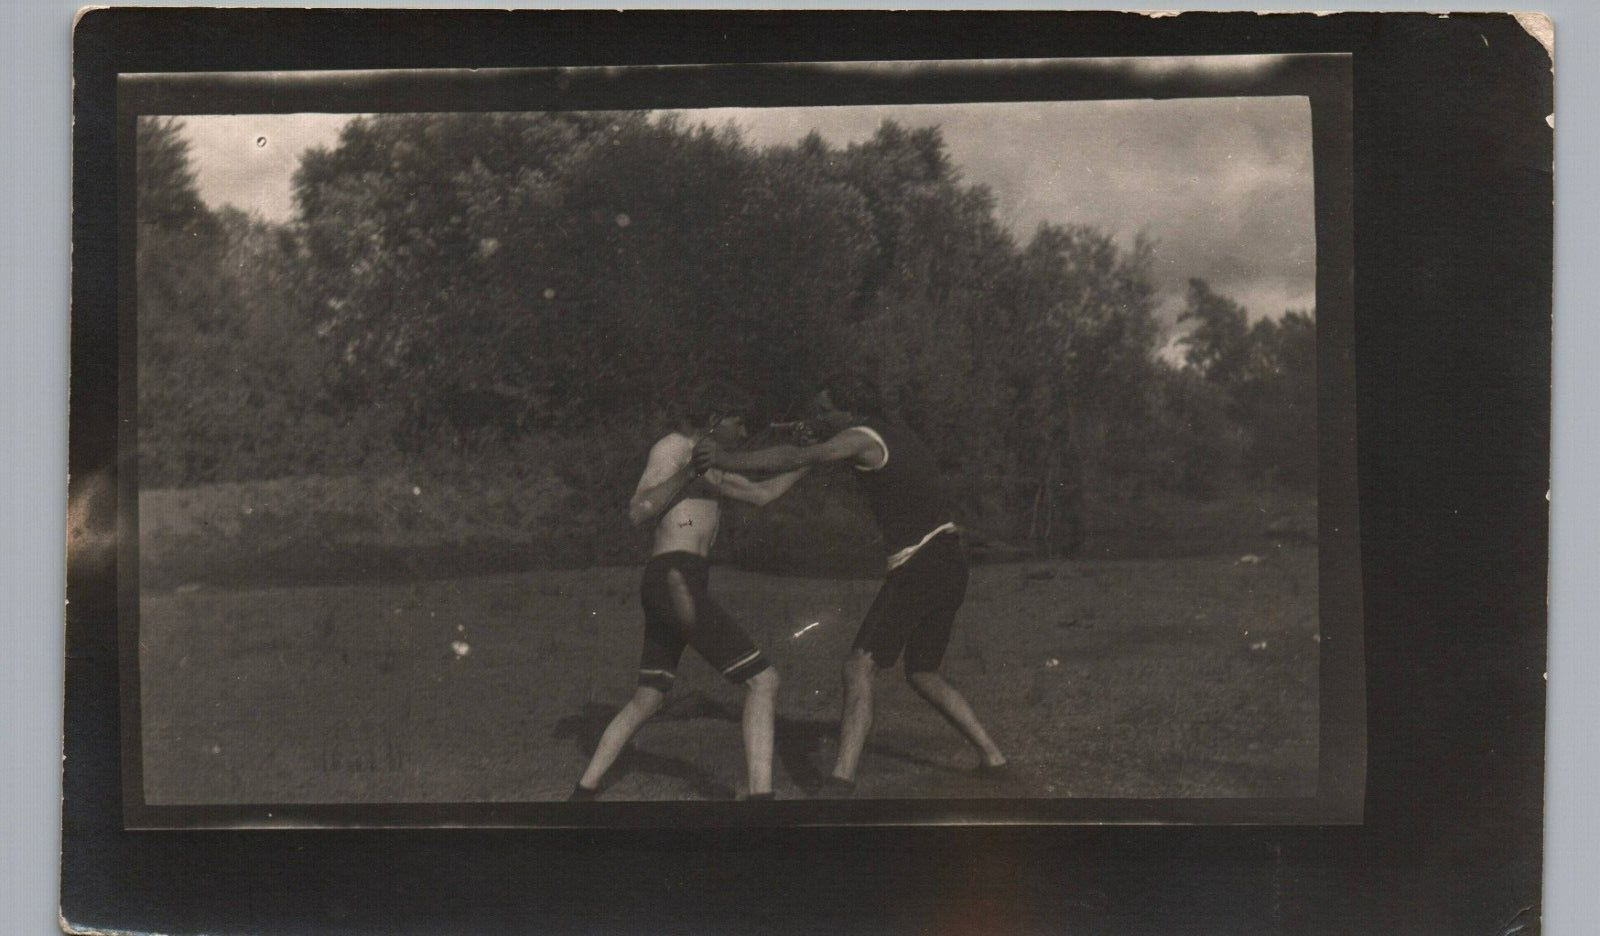 BACKYARD BOXING FIGHT c1910 real photo postcard rppc silly fun boxers antique